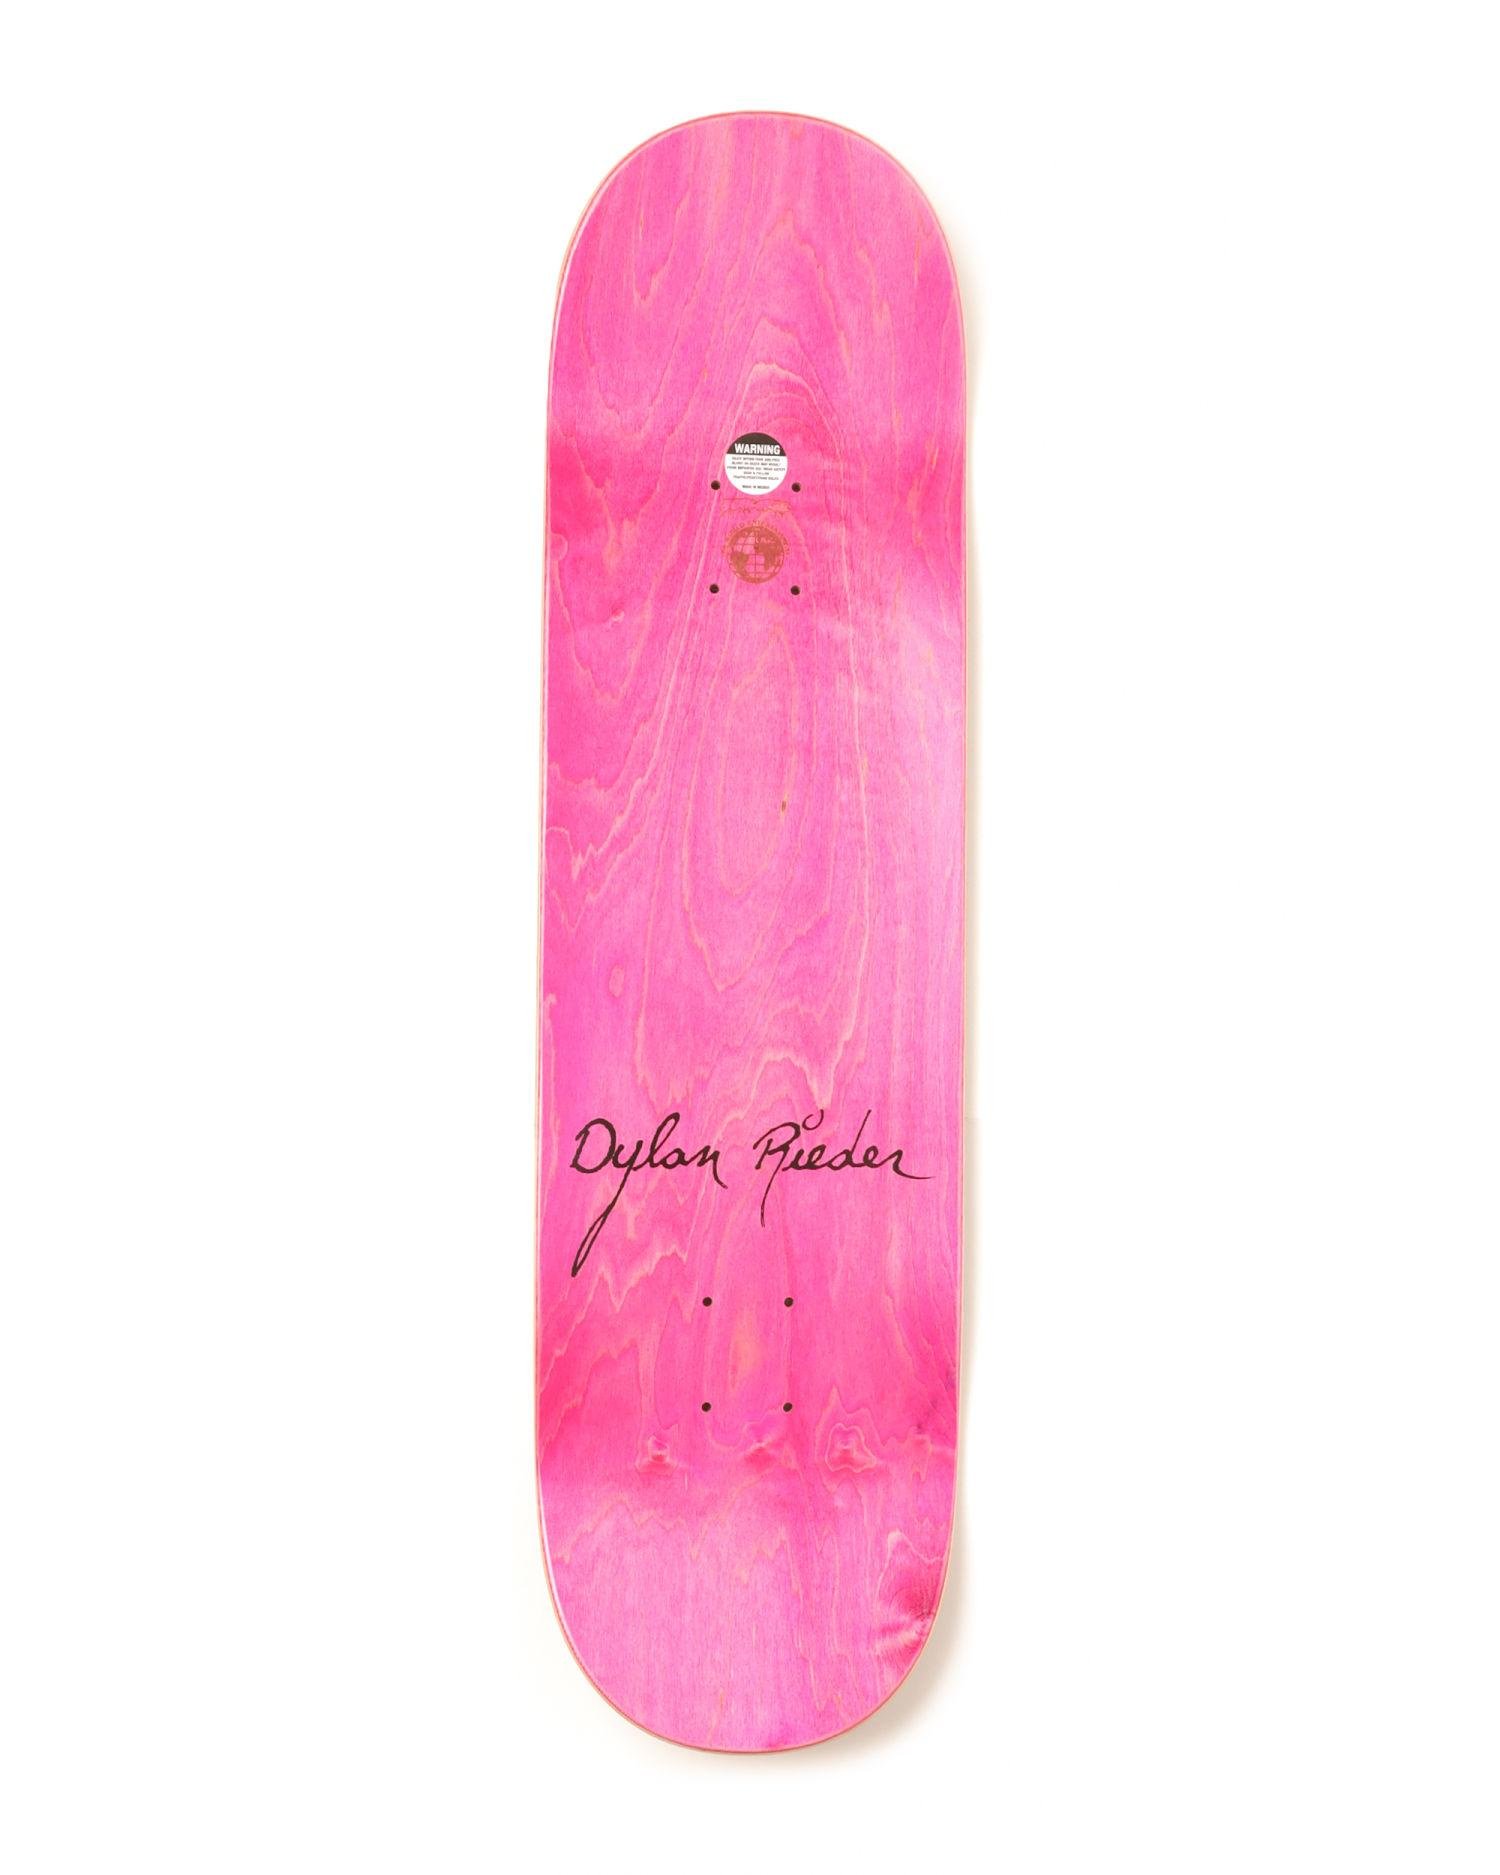 Dylon Rider photo skateboard deck by FUCKING AWESOME